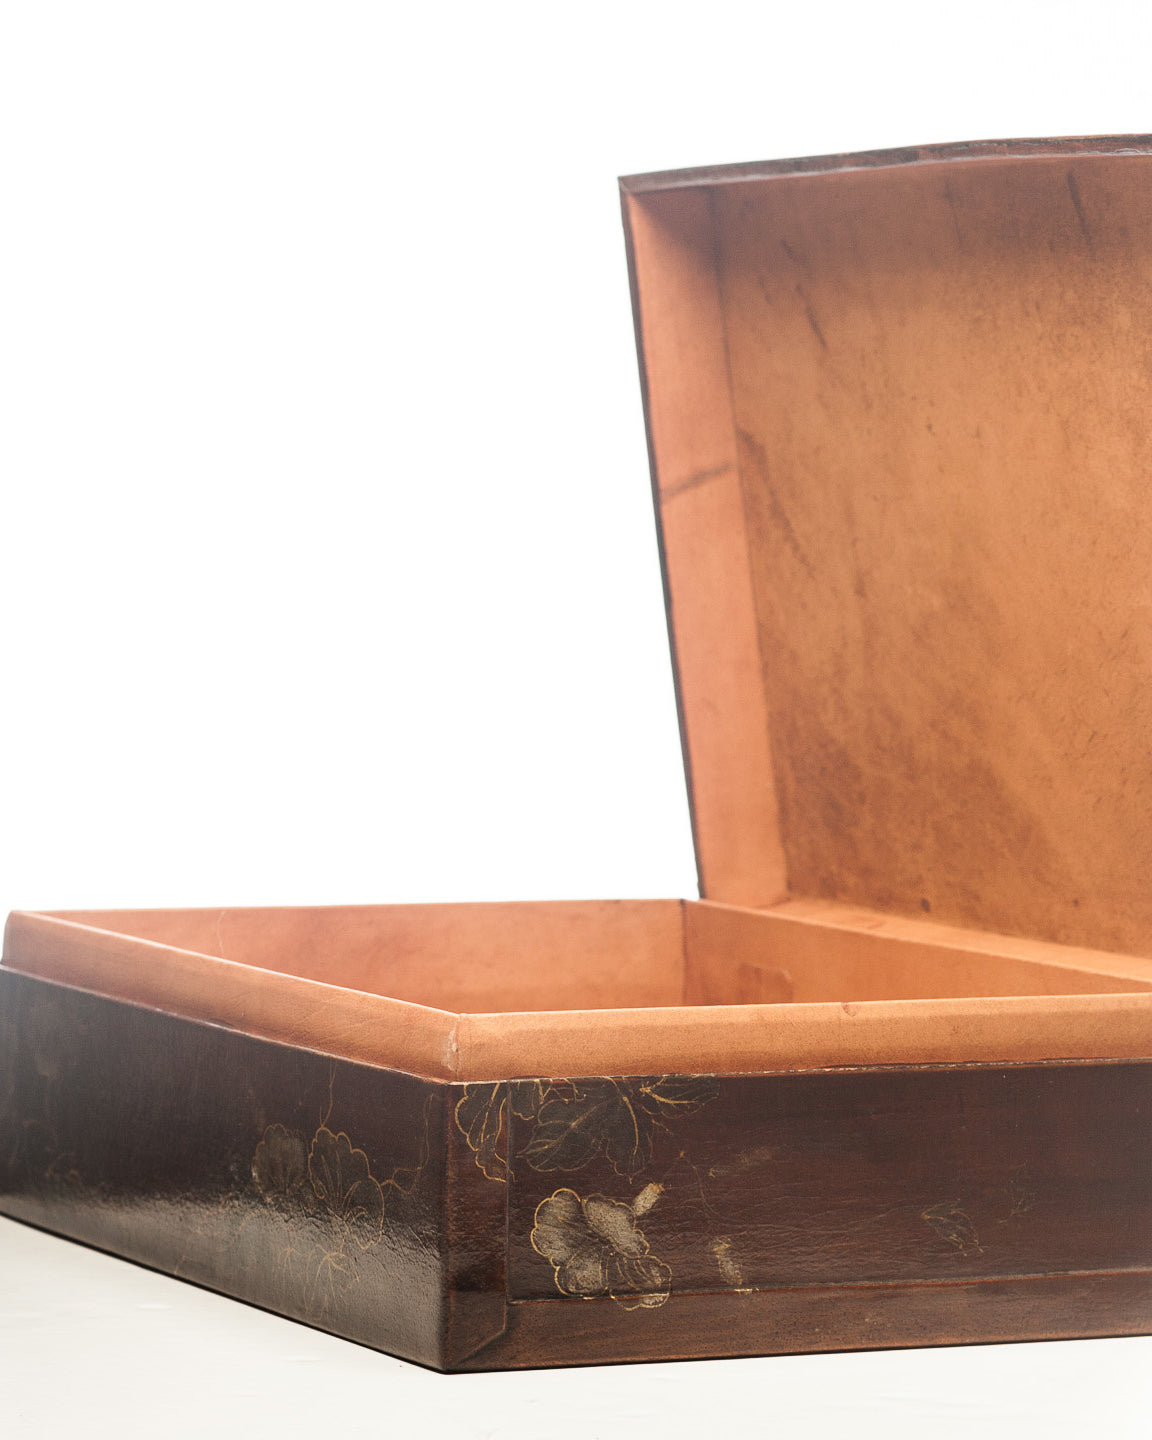 Mahogany Valentine Leather Box (17") with Design of Morning Glories